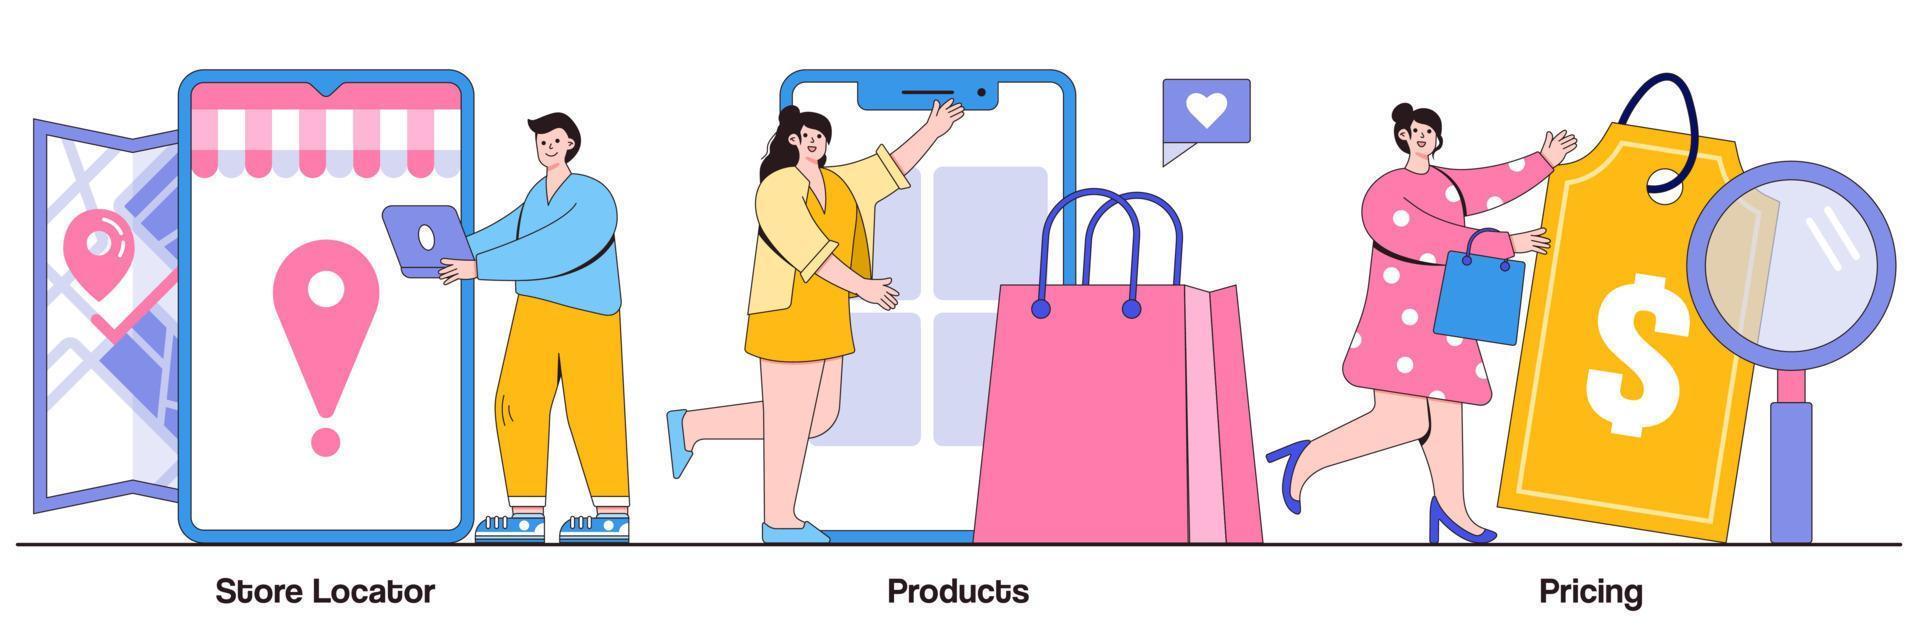 Store locator, product, pricing concept with tiny people. E-commerce website vector illustration set. Website menu bar, find us, service catalog, retail store, online shopping, wishlist metaphor